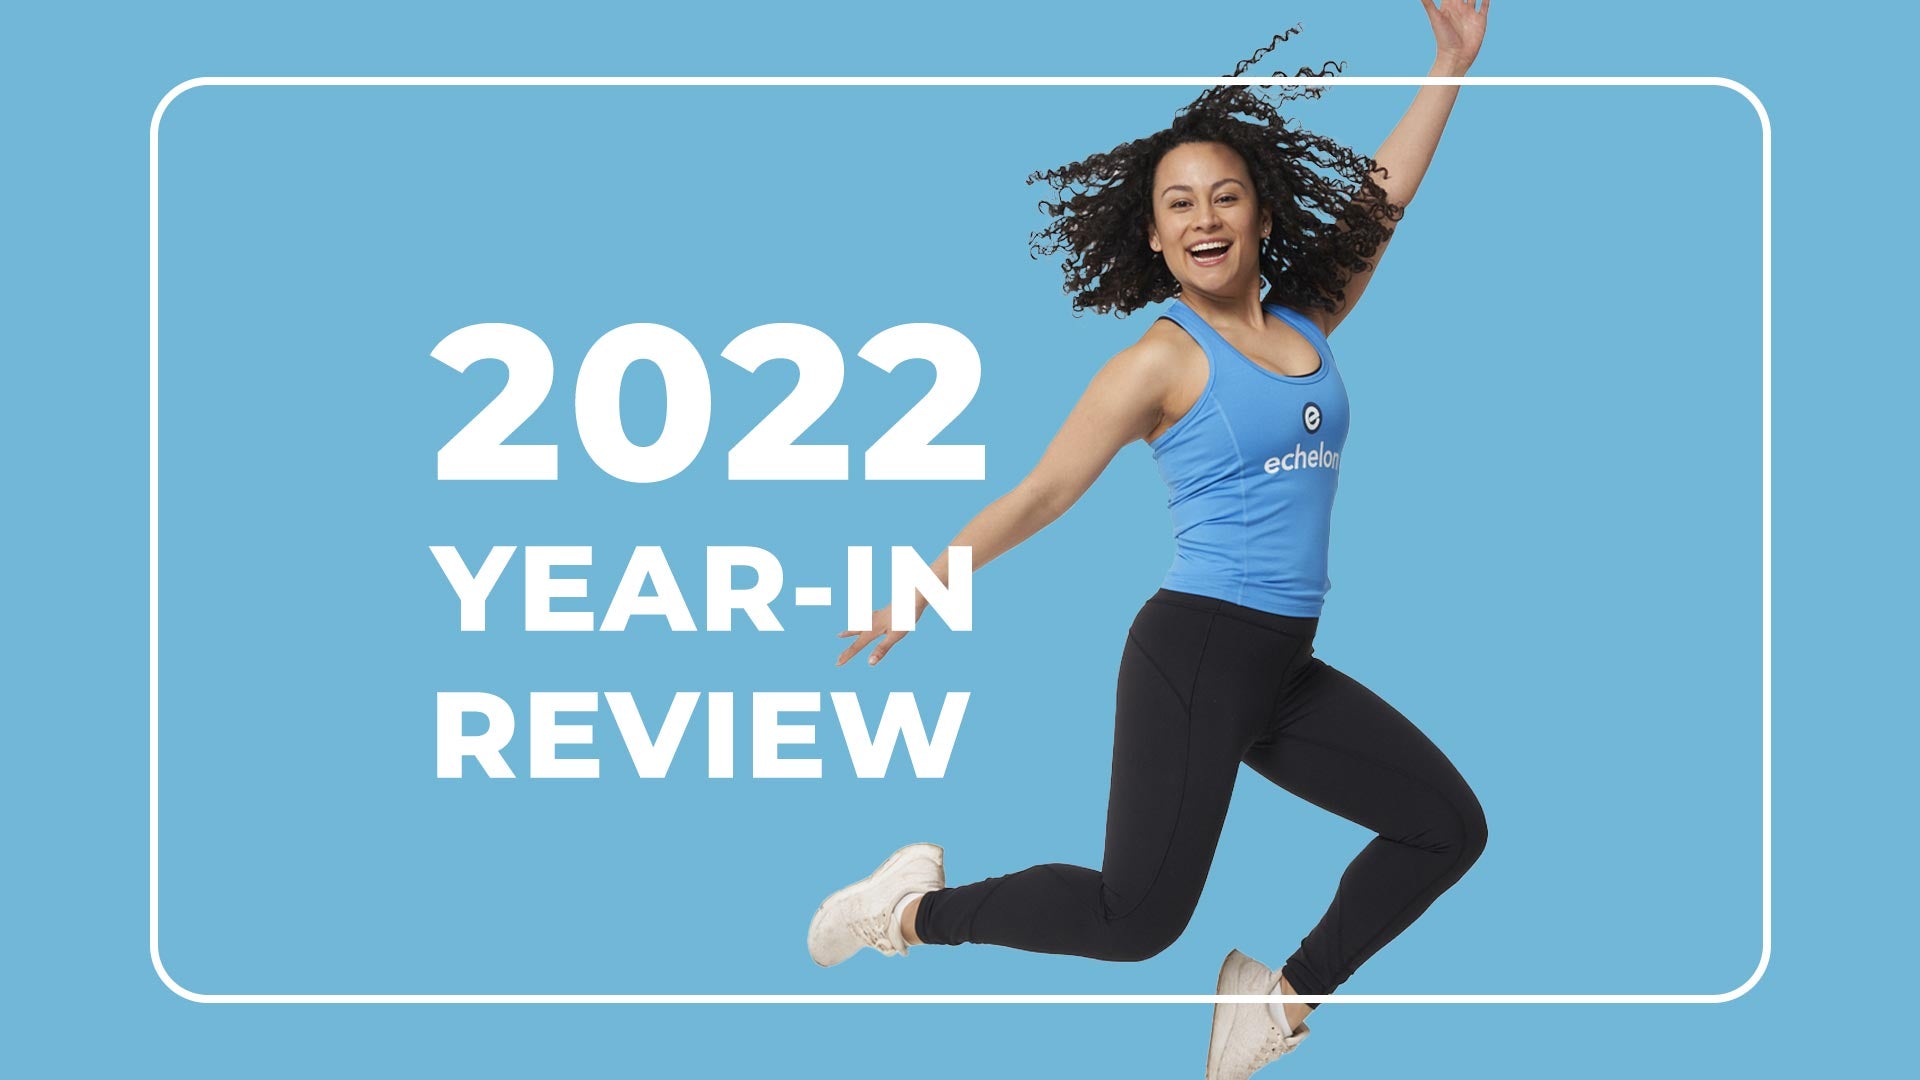 2022 – Echelon’s Year in Review